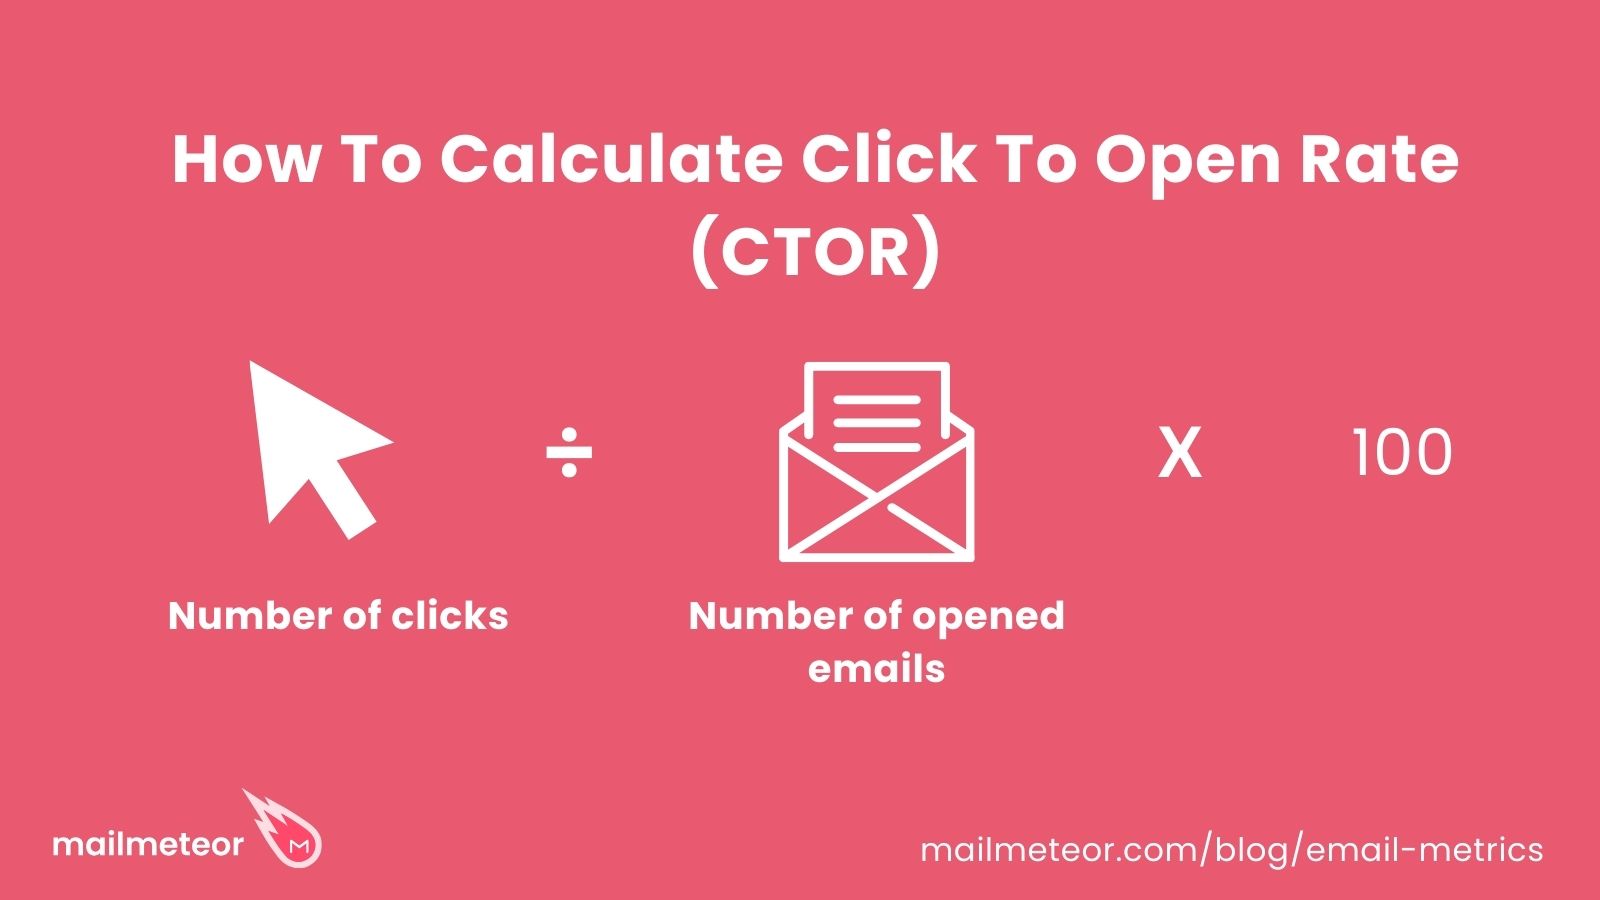 How to calculate click to open rate